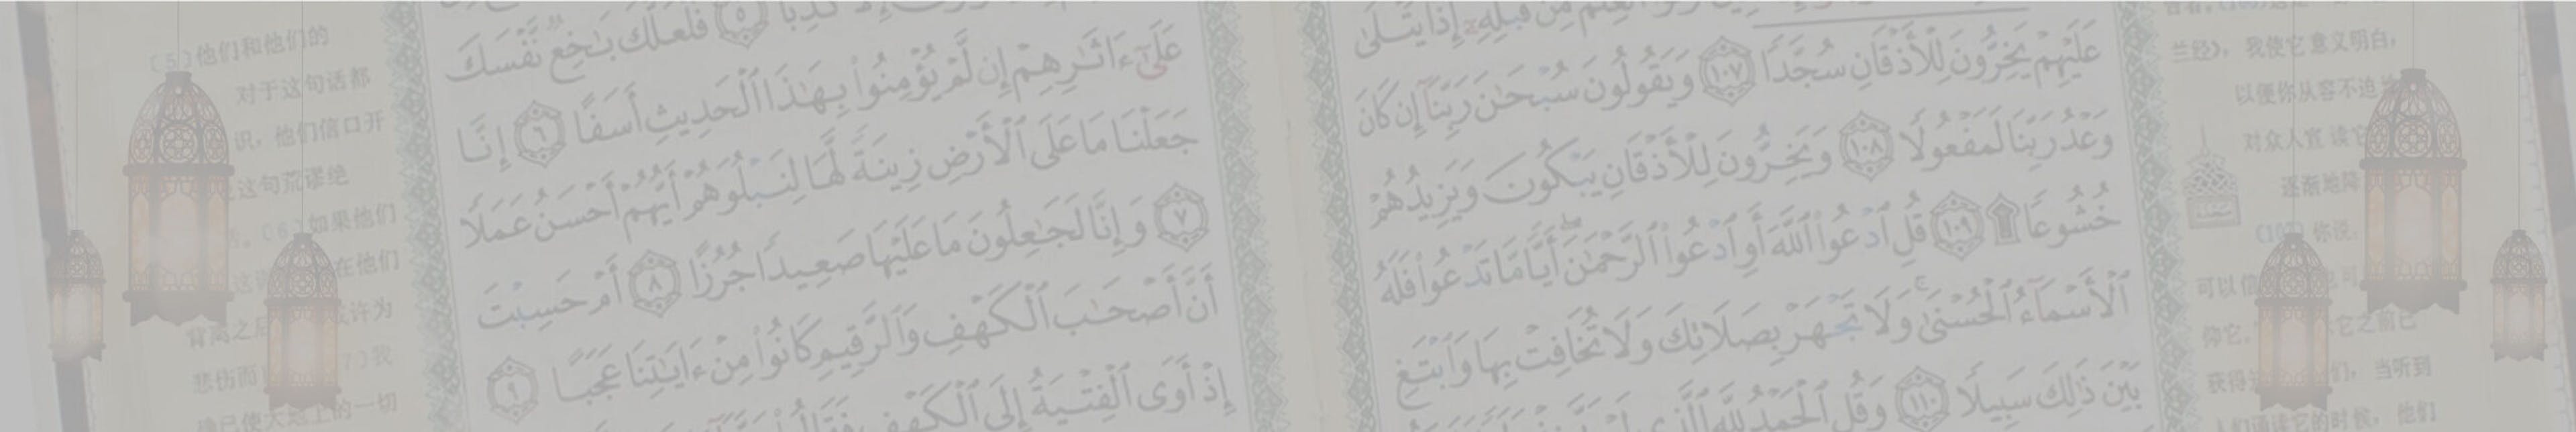 9 Simple Ways to Memorize the Quran